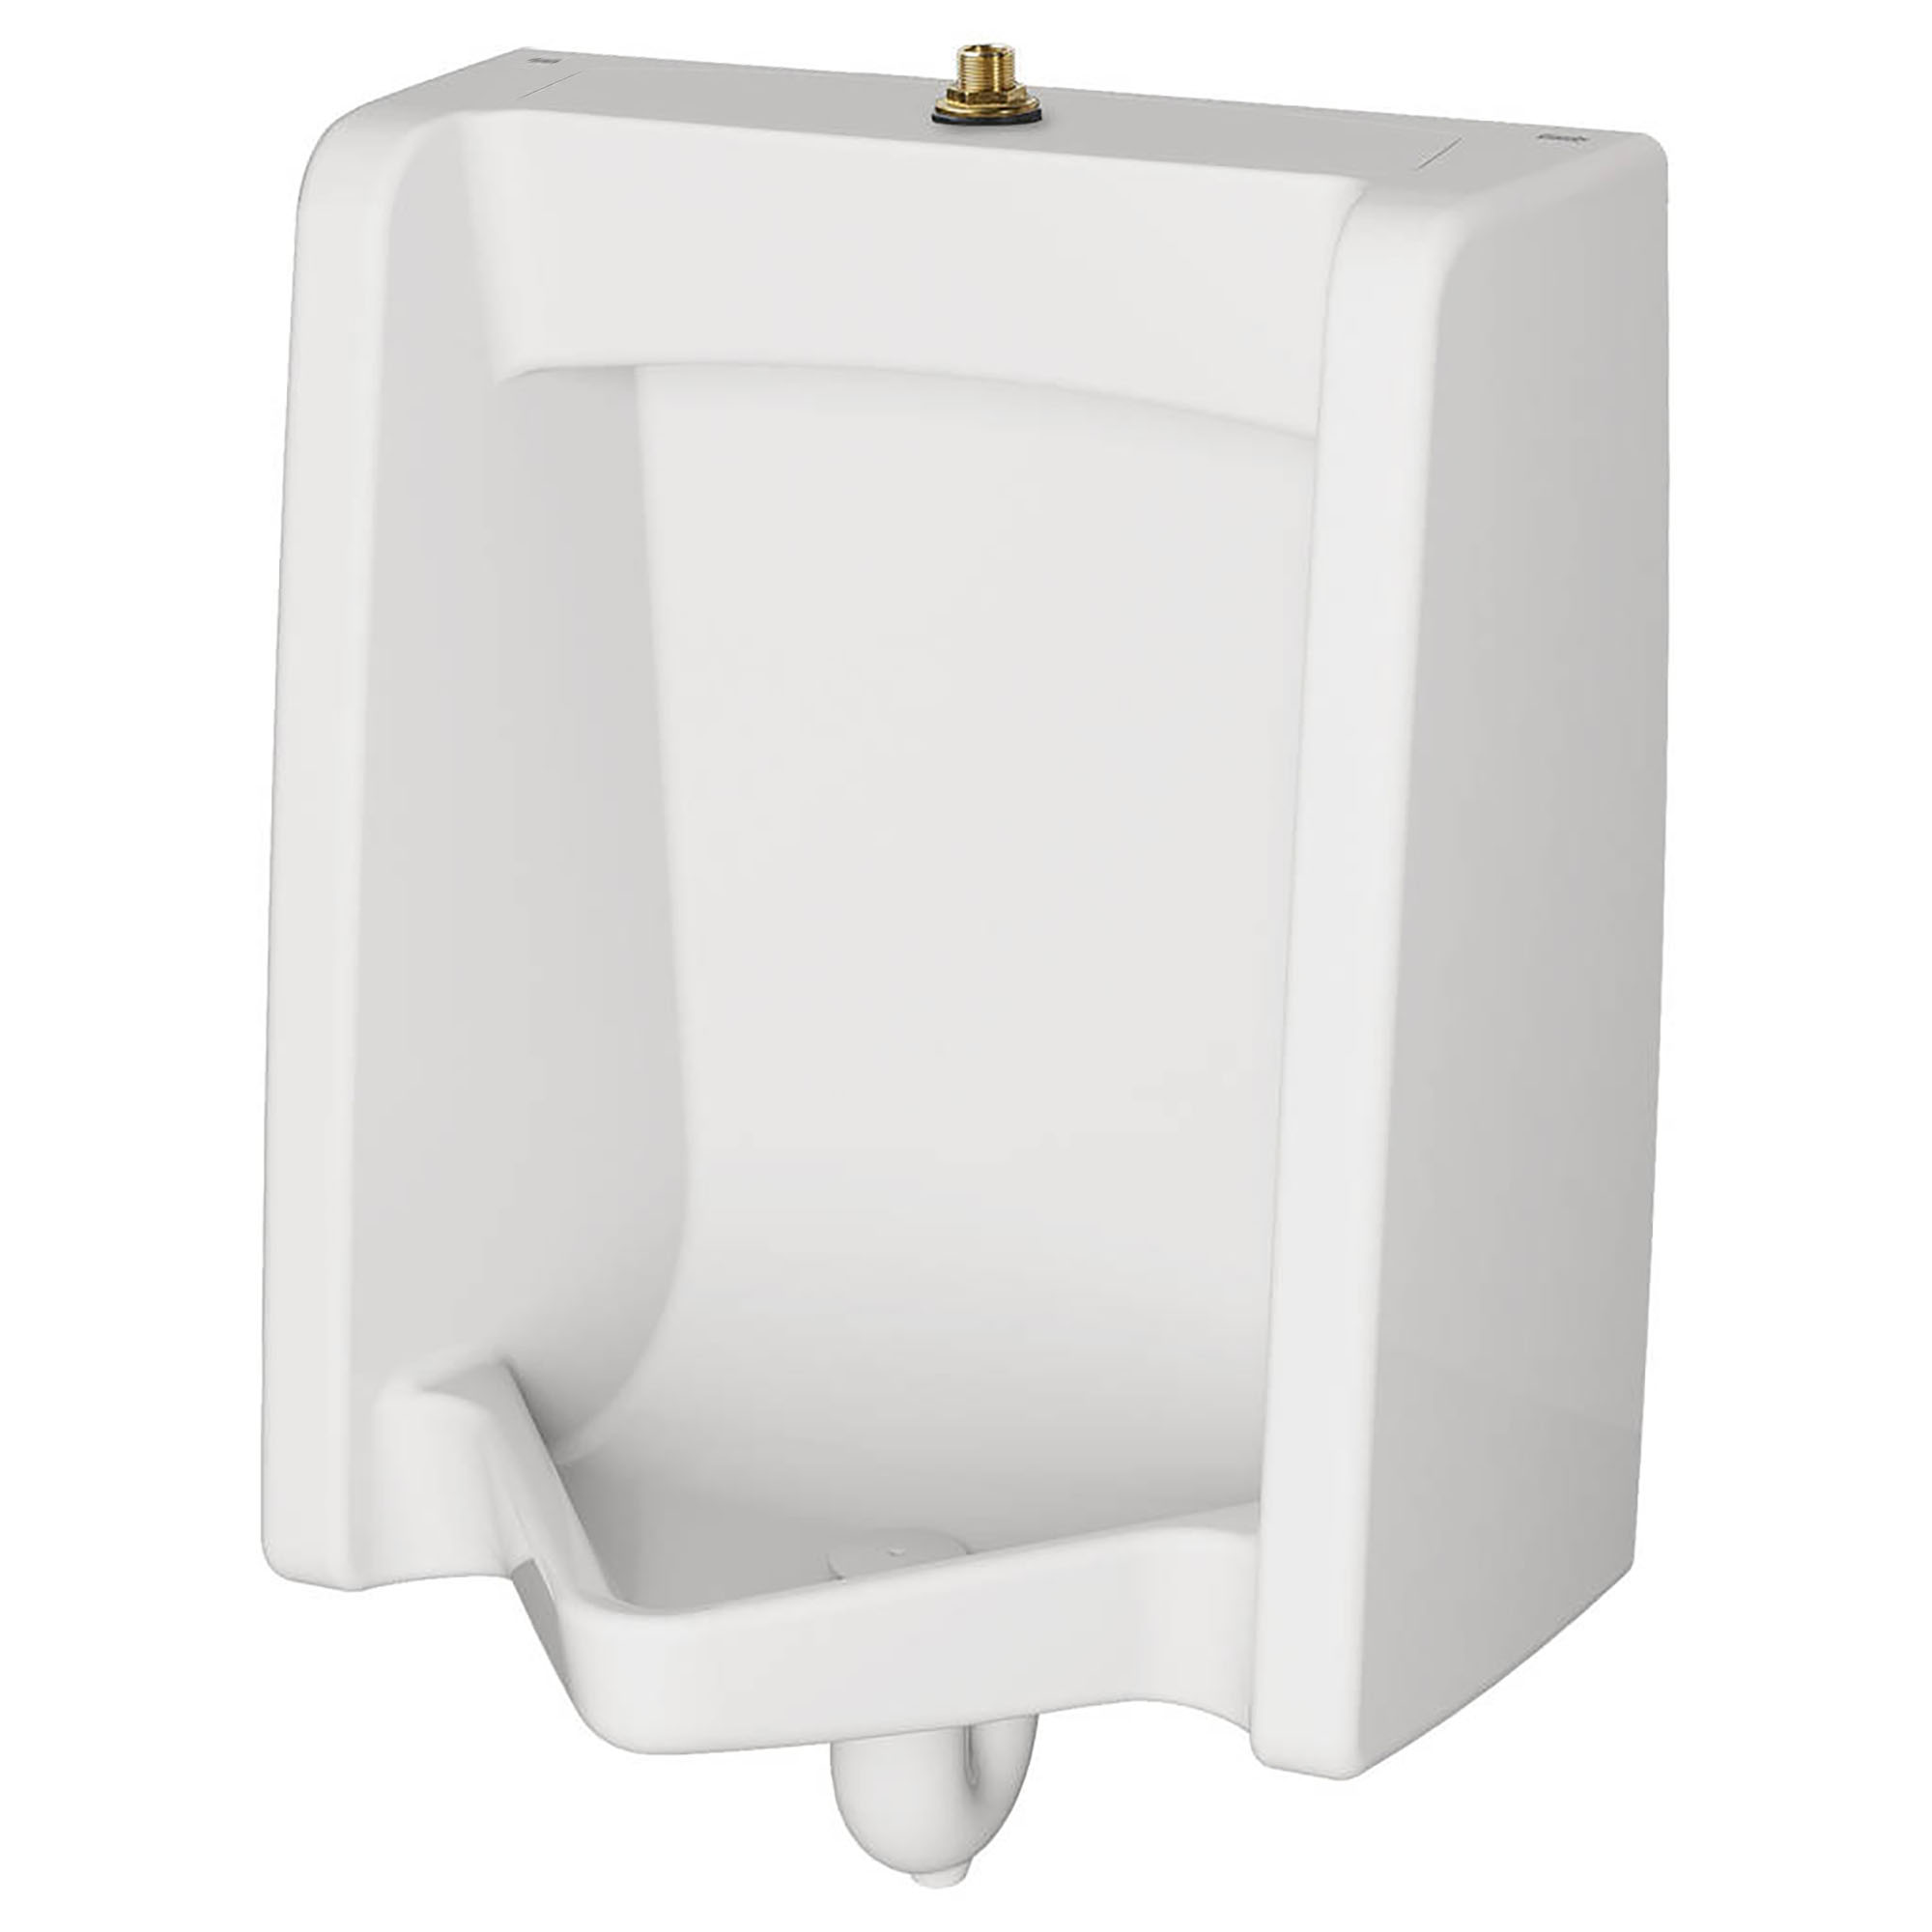 Washbrook® 0.125 – 1.0 gpf (0.47 – 3.8 Lpf) Top Spud Urinal with EverClean